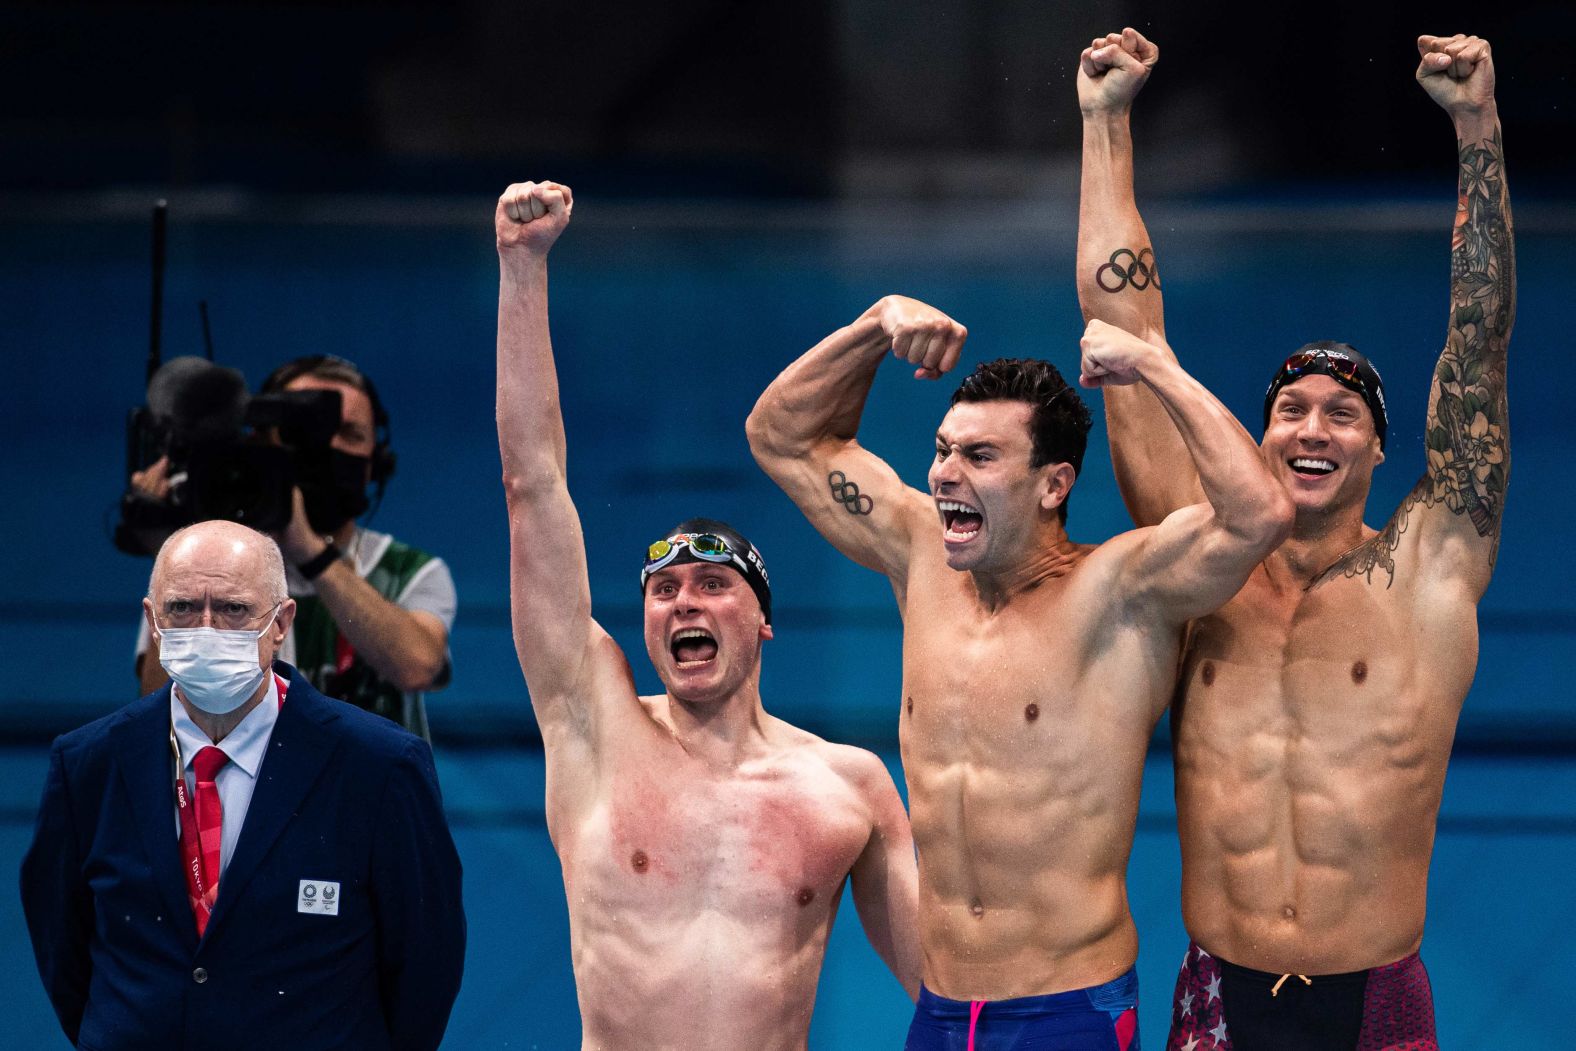 Three US swimmers — from right, Caeleb Dressel, Blake Pieroni and Bowen Becker — celebrate after <a href="index.php?page=&url=https%3A%2F%2Fwww.cnn.com%2Fworld%2Flive-news%2Ftokyo-2020-olympics-07-26-21-spt%2Fh_a2676f178c57545842ef135c0601906e" target="_blank">winning the 4x100-meter freestyle relay</a> on July 26. Not pictured is teammate Zach Apple, who swam the anchor leg.